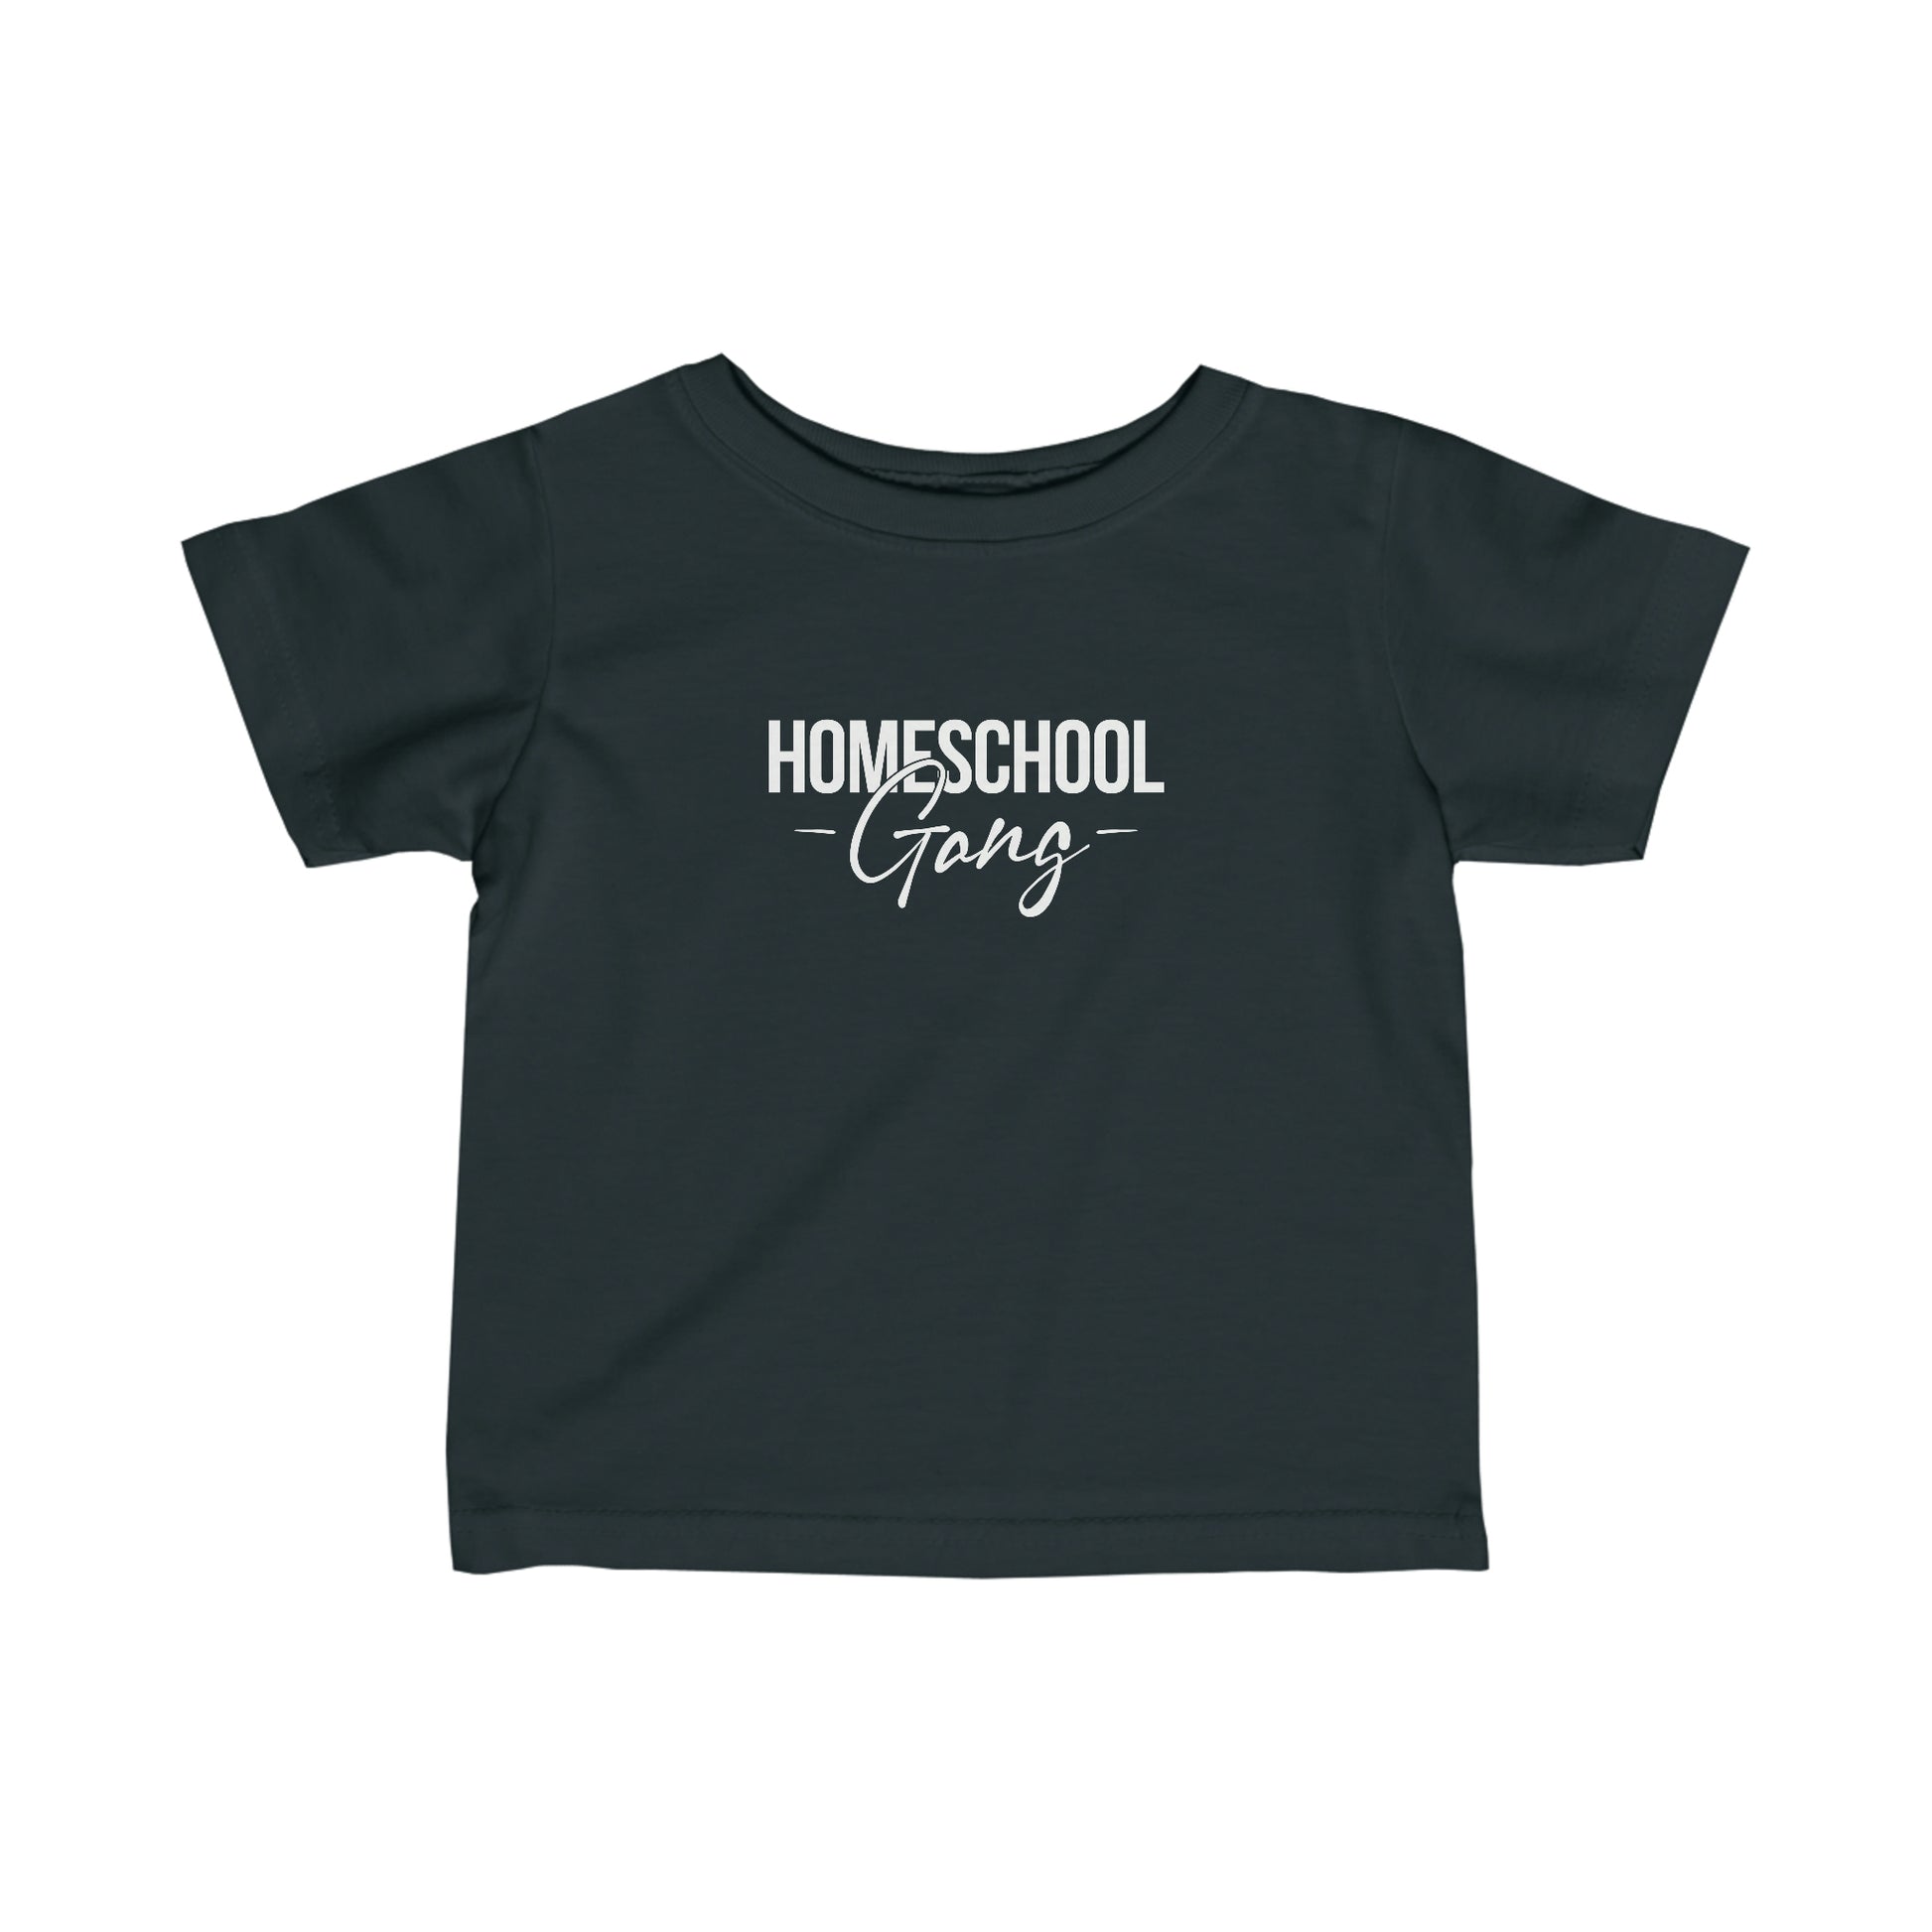 Detailed view of the soft, ringspun cotton fabric of the Homeschool Gang Toddler Tee.